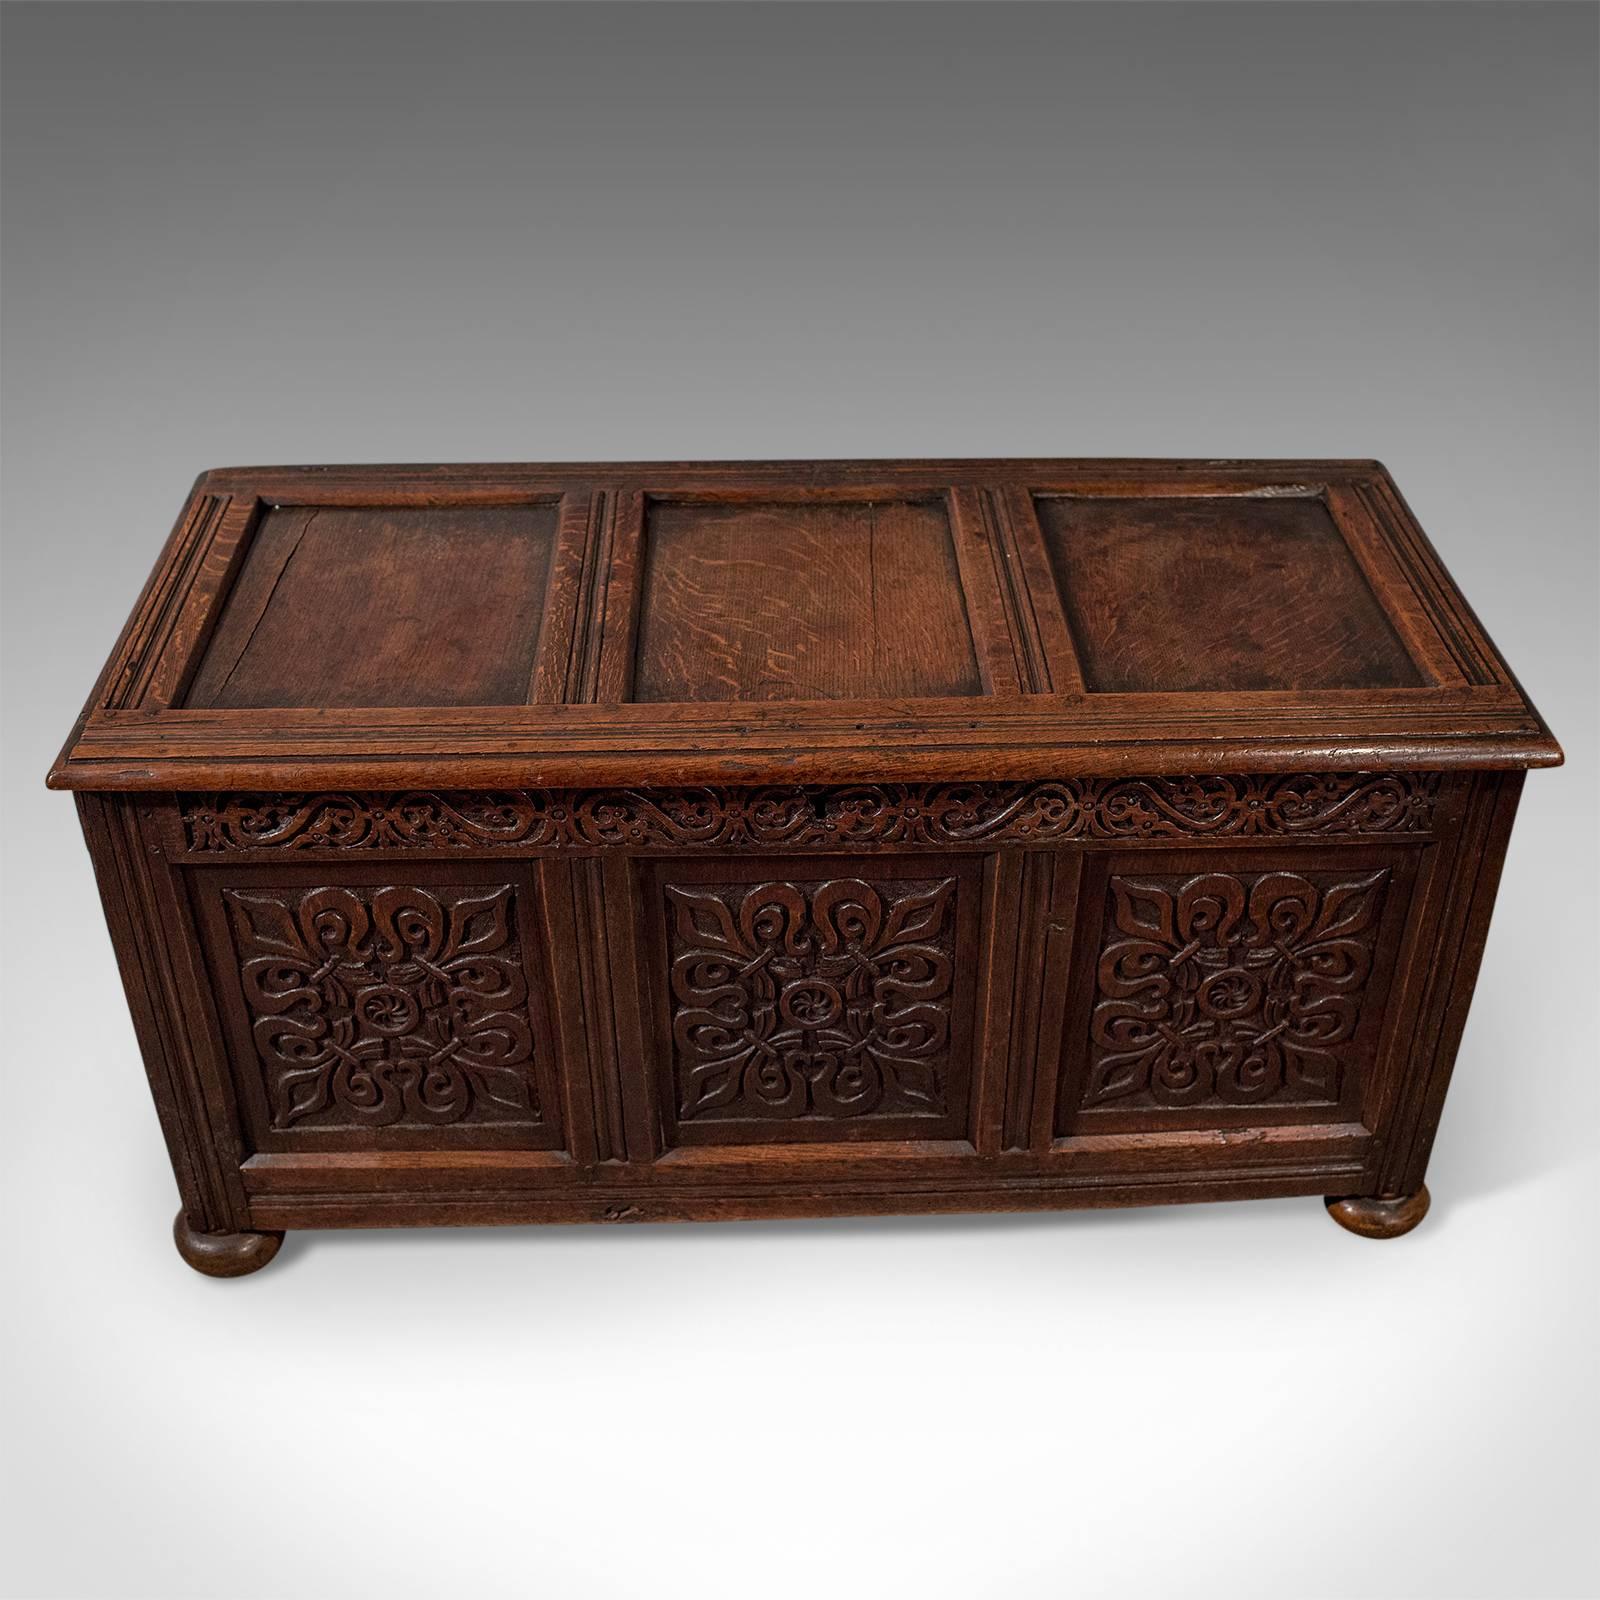 This is a carved antique coffer, an English oak joined chest dating to the Queen Anne period, circa 1700.

Glorious color and desirable aged patina
Vigorously carved geometric decoration to the front panels
Foliate frieze to carved upper